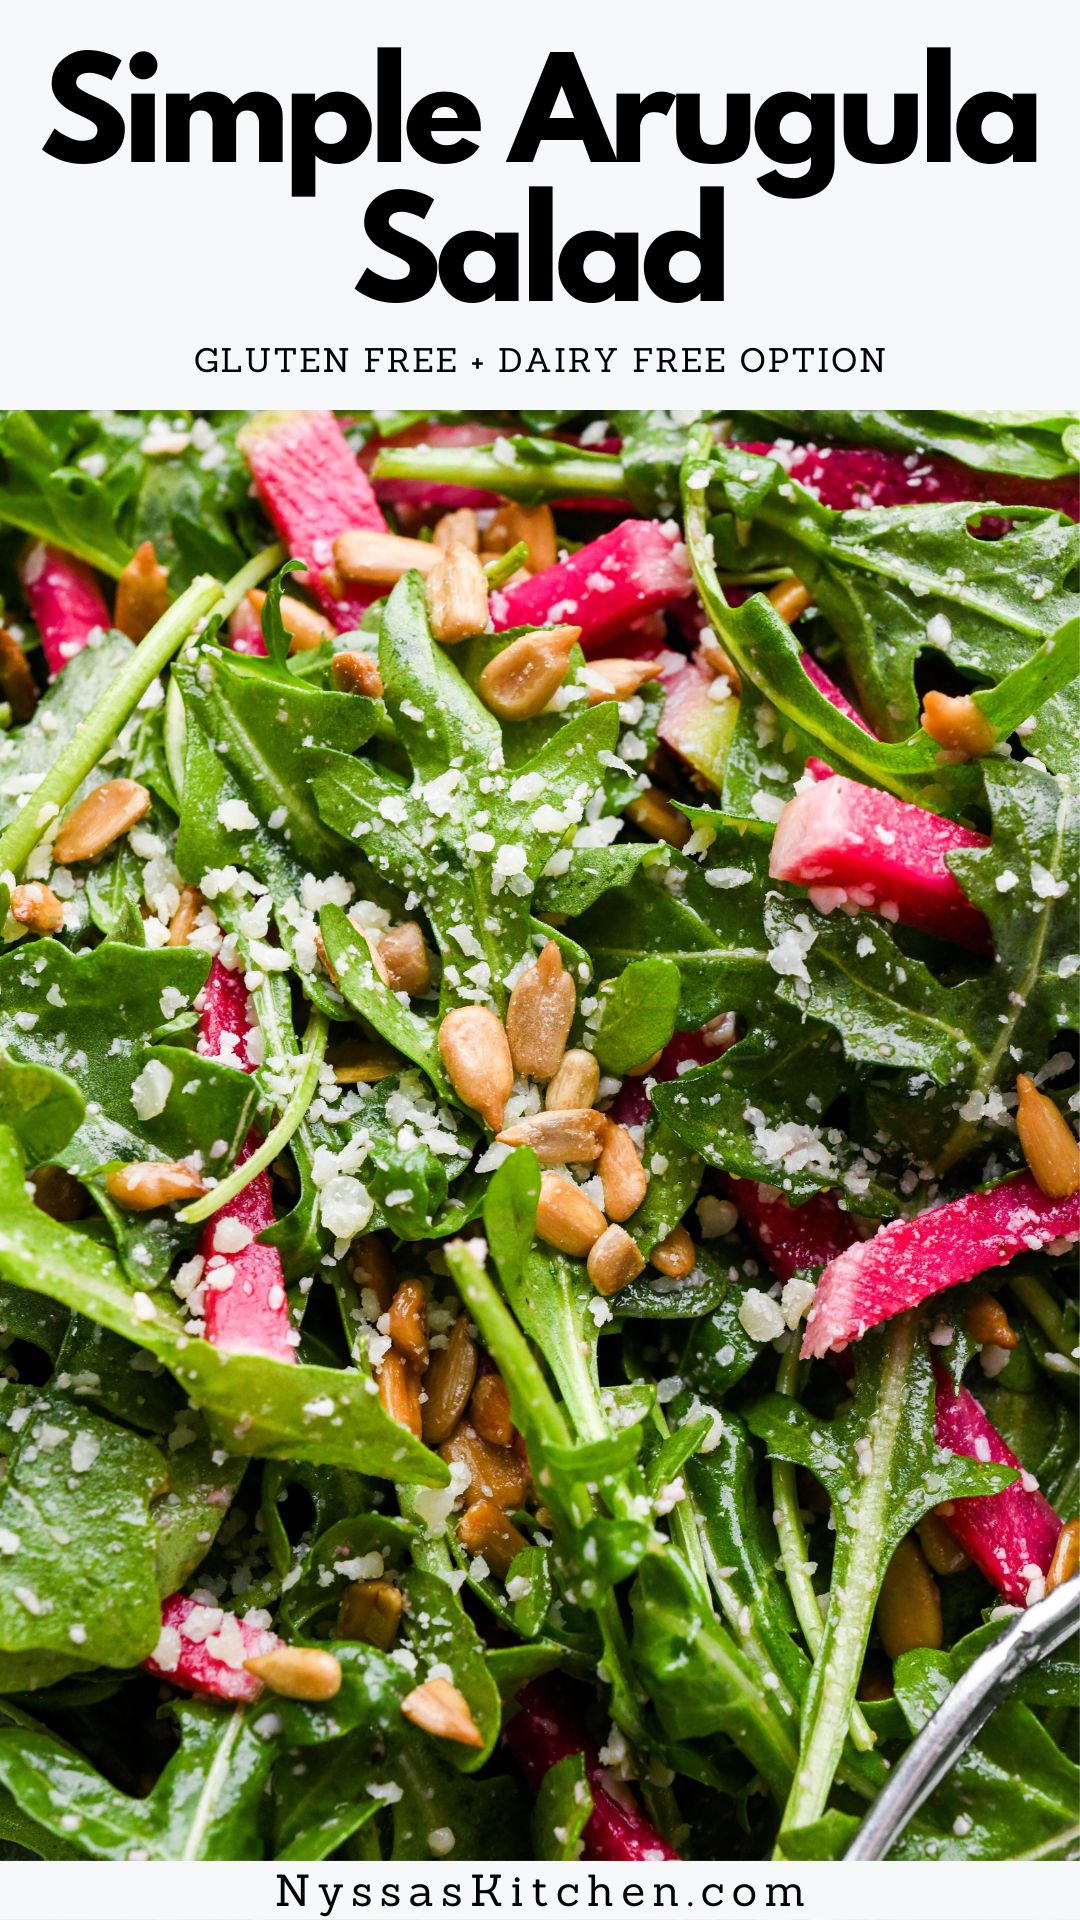 This fresh and simple arugula salad is the best salad to throw together when you're short on time but want something green on your lunch or dinner plate! Made with nutrient dense arugula, thinly sliced radish, sunflower seeds, parmesan cheese, and a simple lemony dressing. Gluten free and easily made dairy free / vegan.